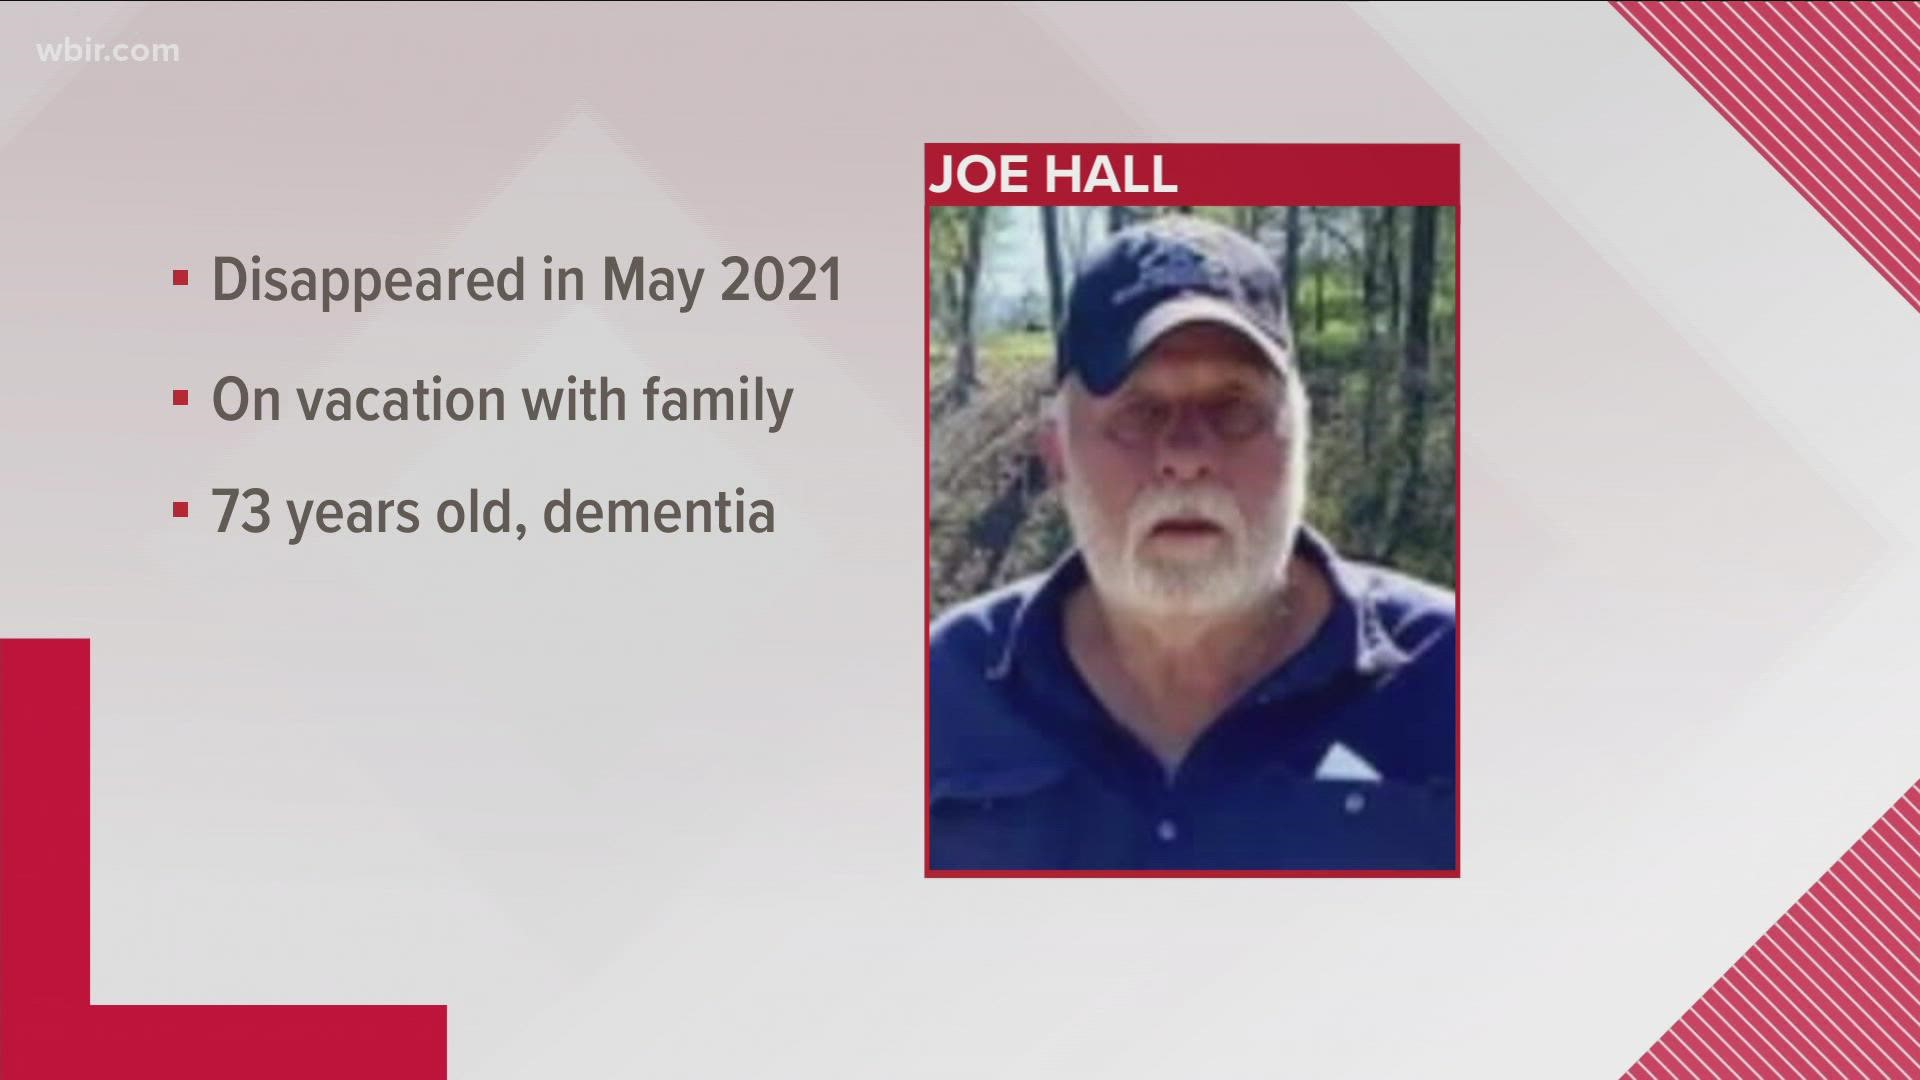 Joe Hall was reported missing in May 2021. They said he had Alzheimer's, and a Silver Alert was issued for him when he disappeared.